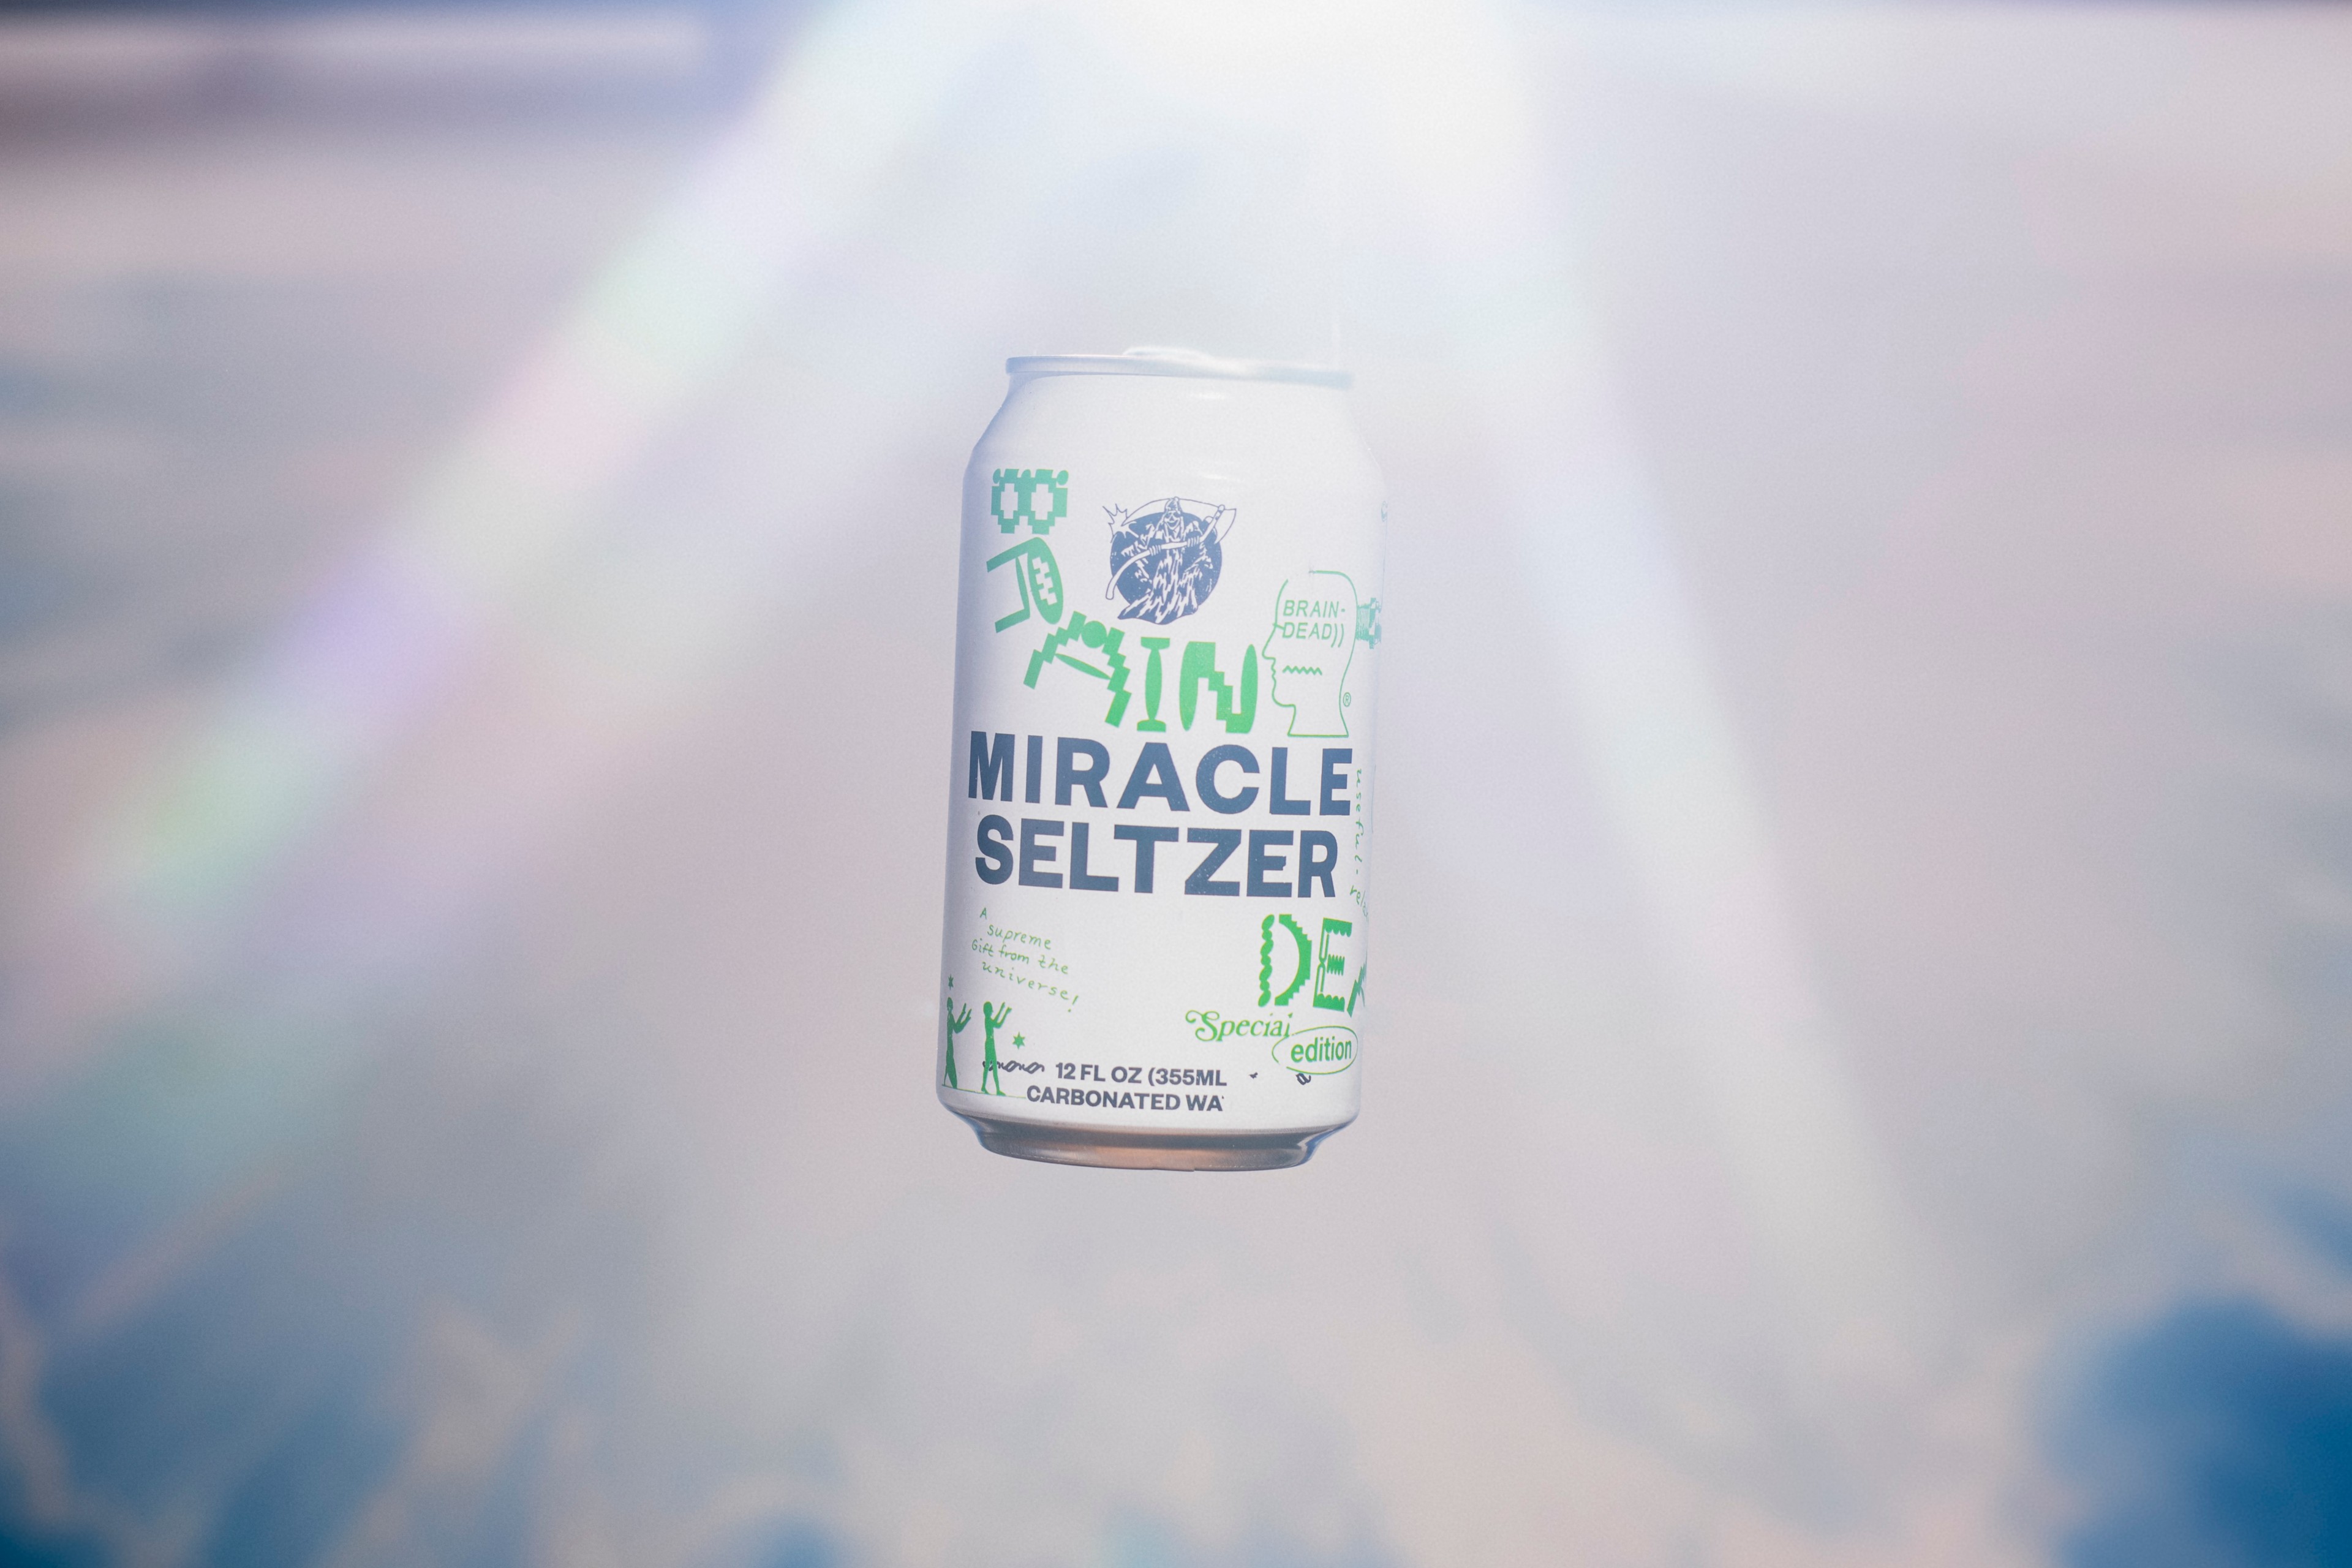 photo of miracle seltzer can floating above the sky with lens flare